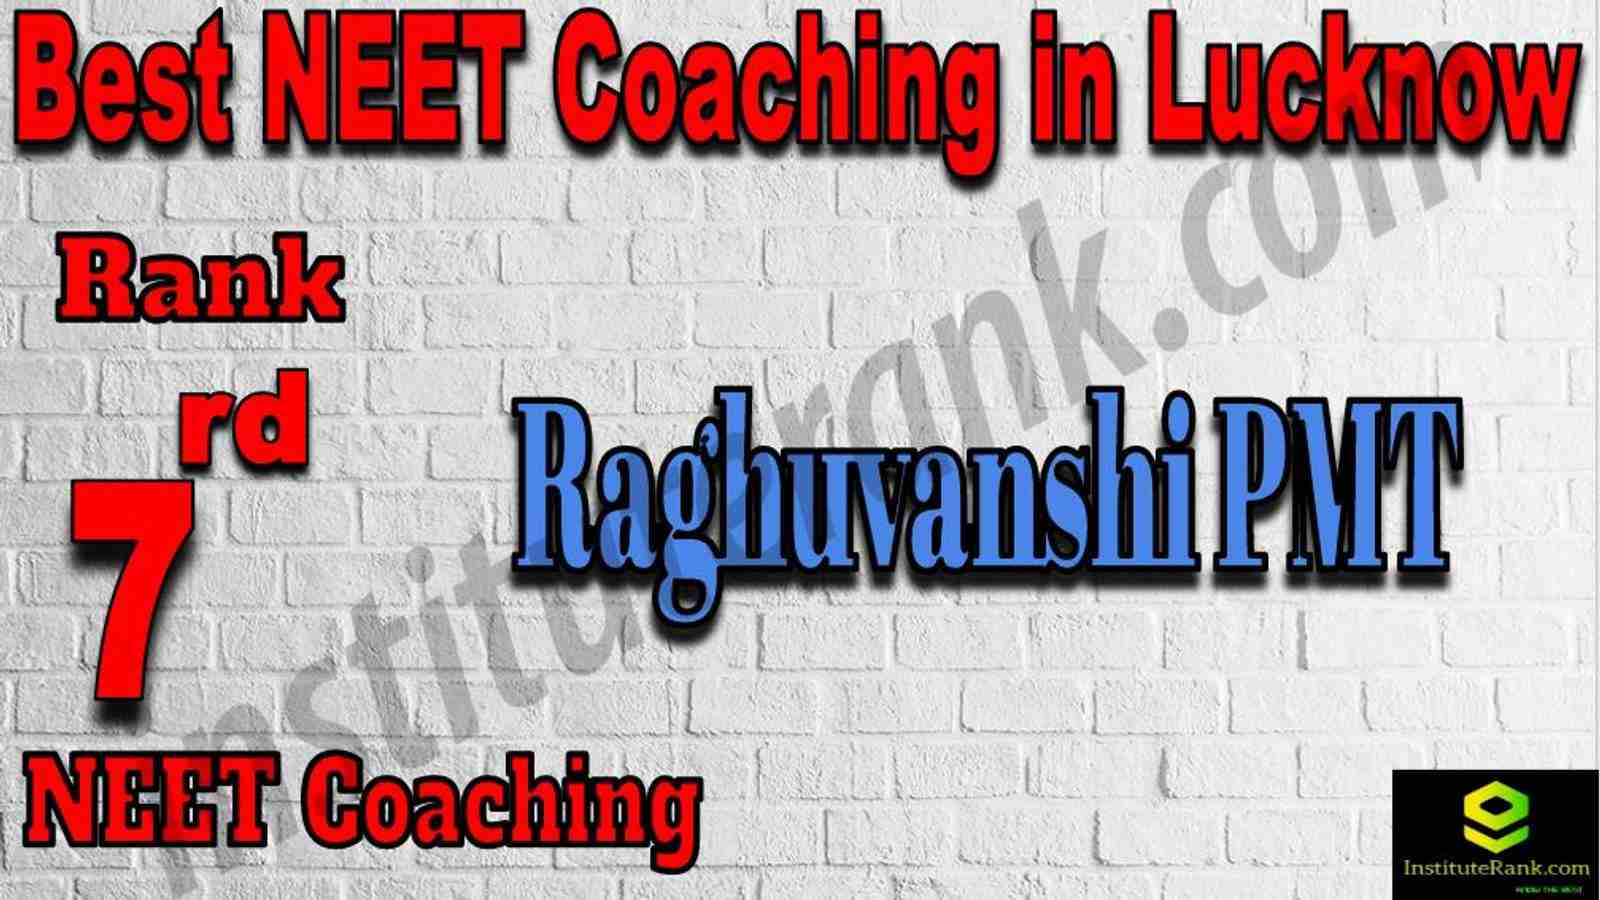 7th Best Neet Coaching in Lucknow